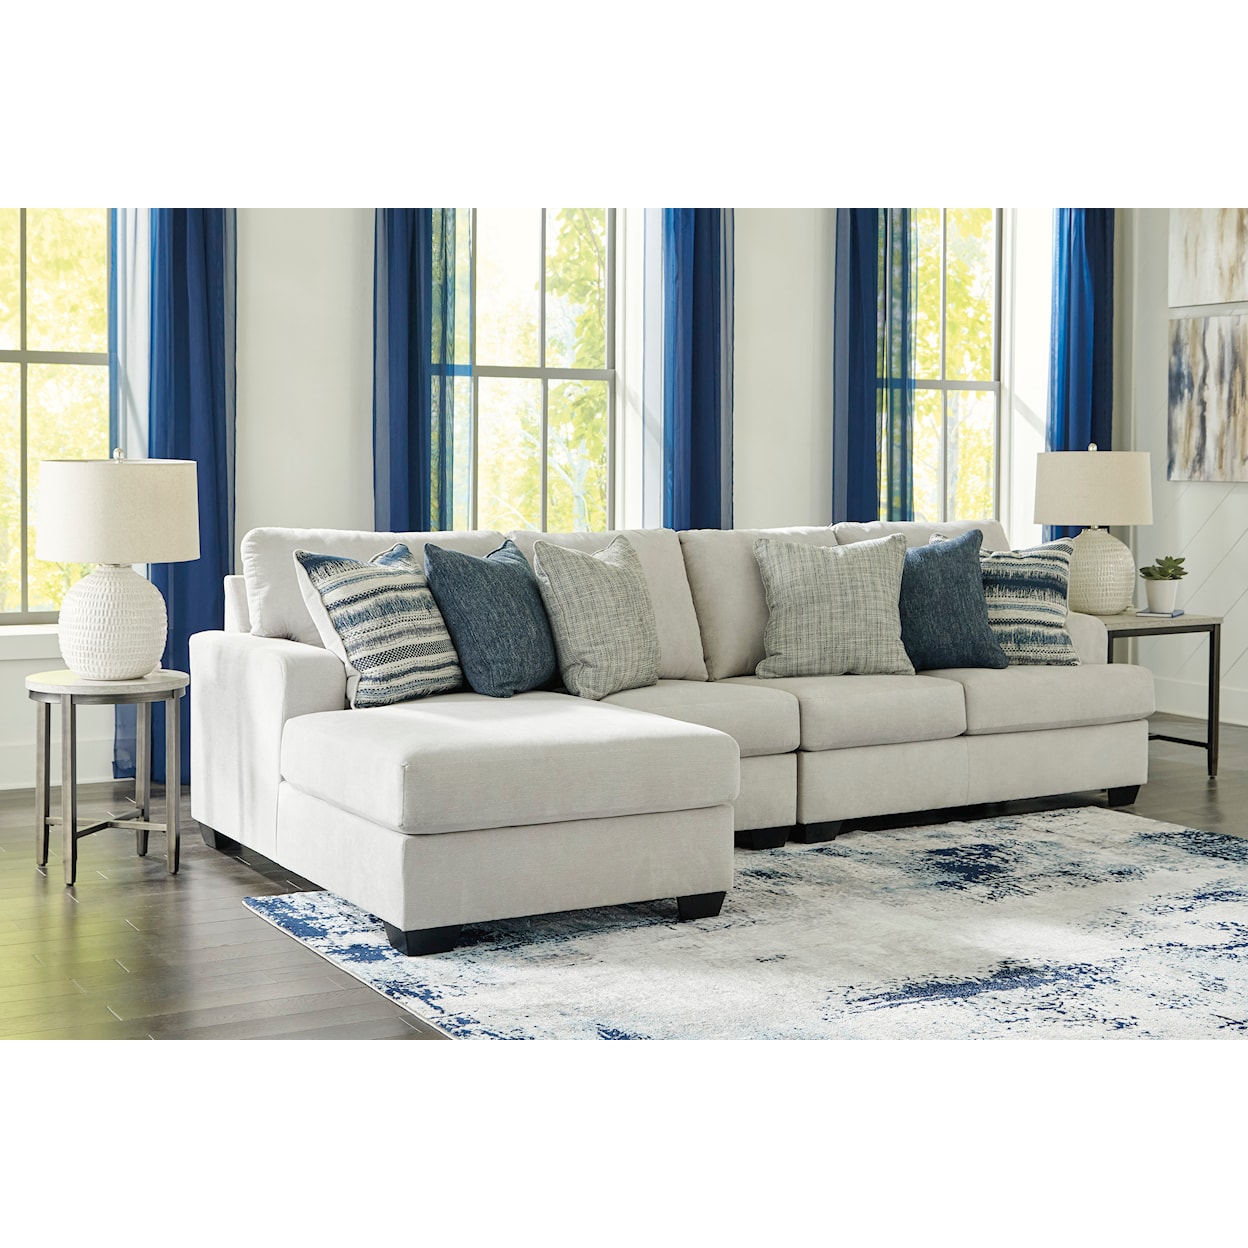 Benchcraft Lowder 3-Piece Sectional with Chaise